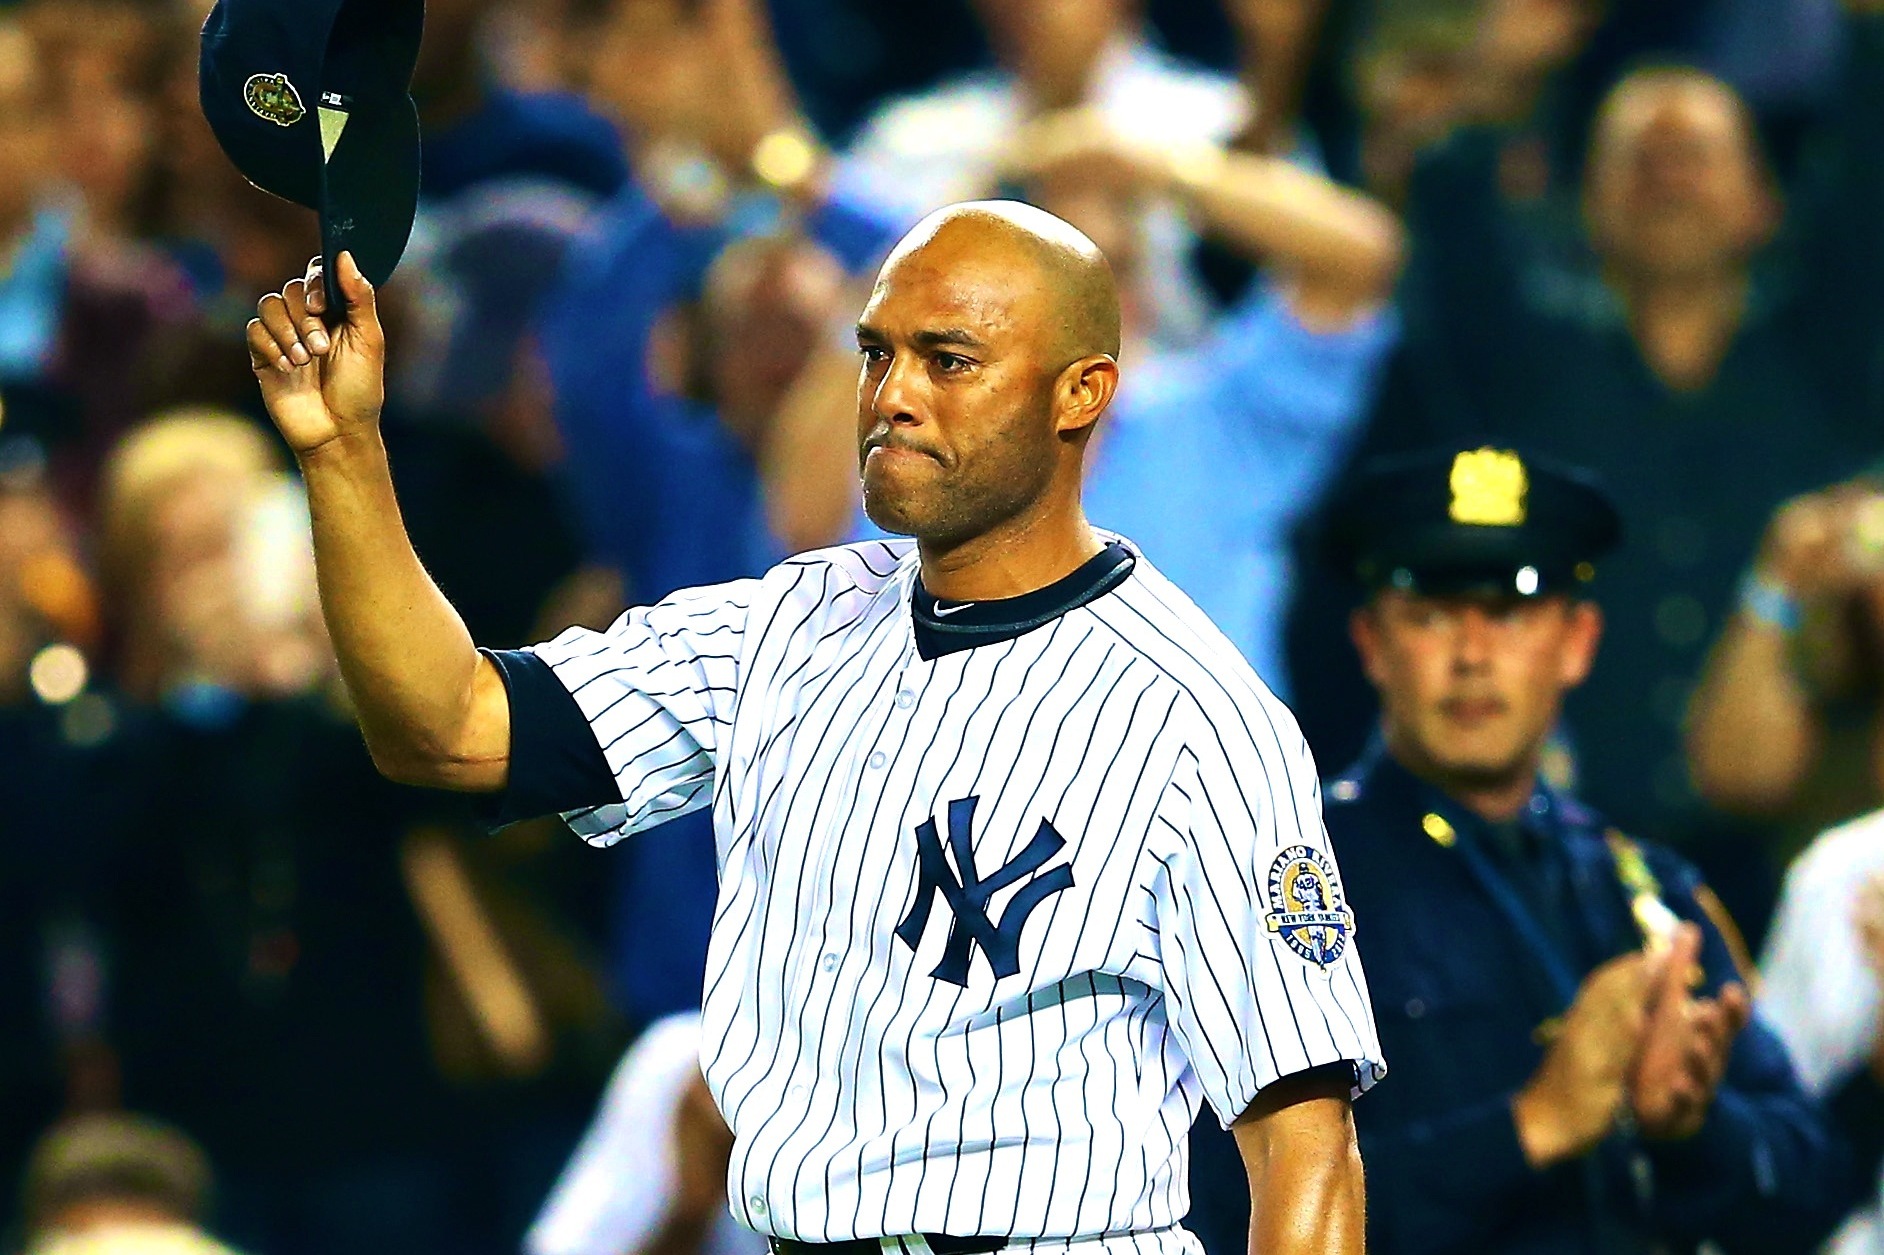 Mariano Rivera's greatest moments as baseball's best closer (video